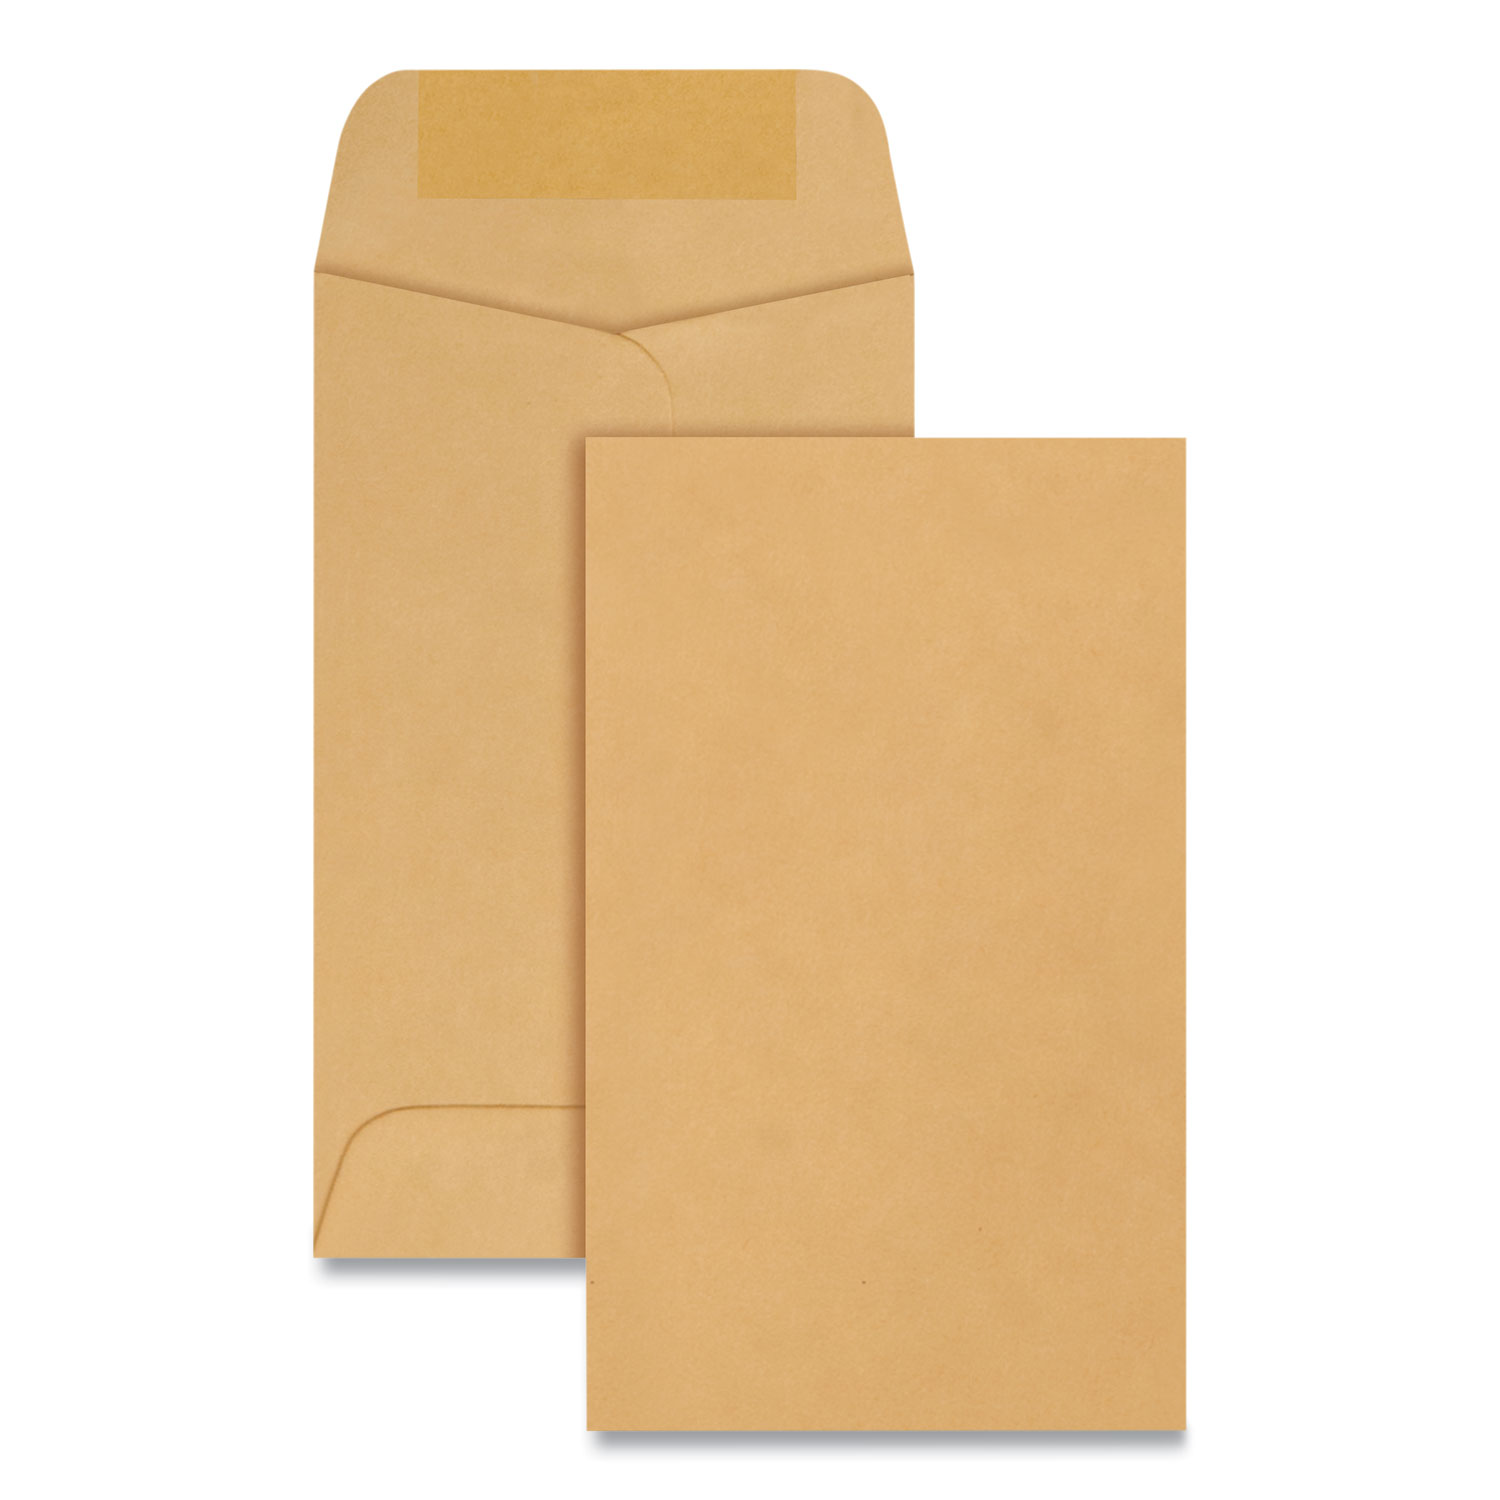 20 Small Paper Bags 3.5 X 2.25 X 6.5, Printable Bags, Small White